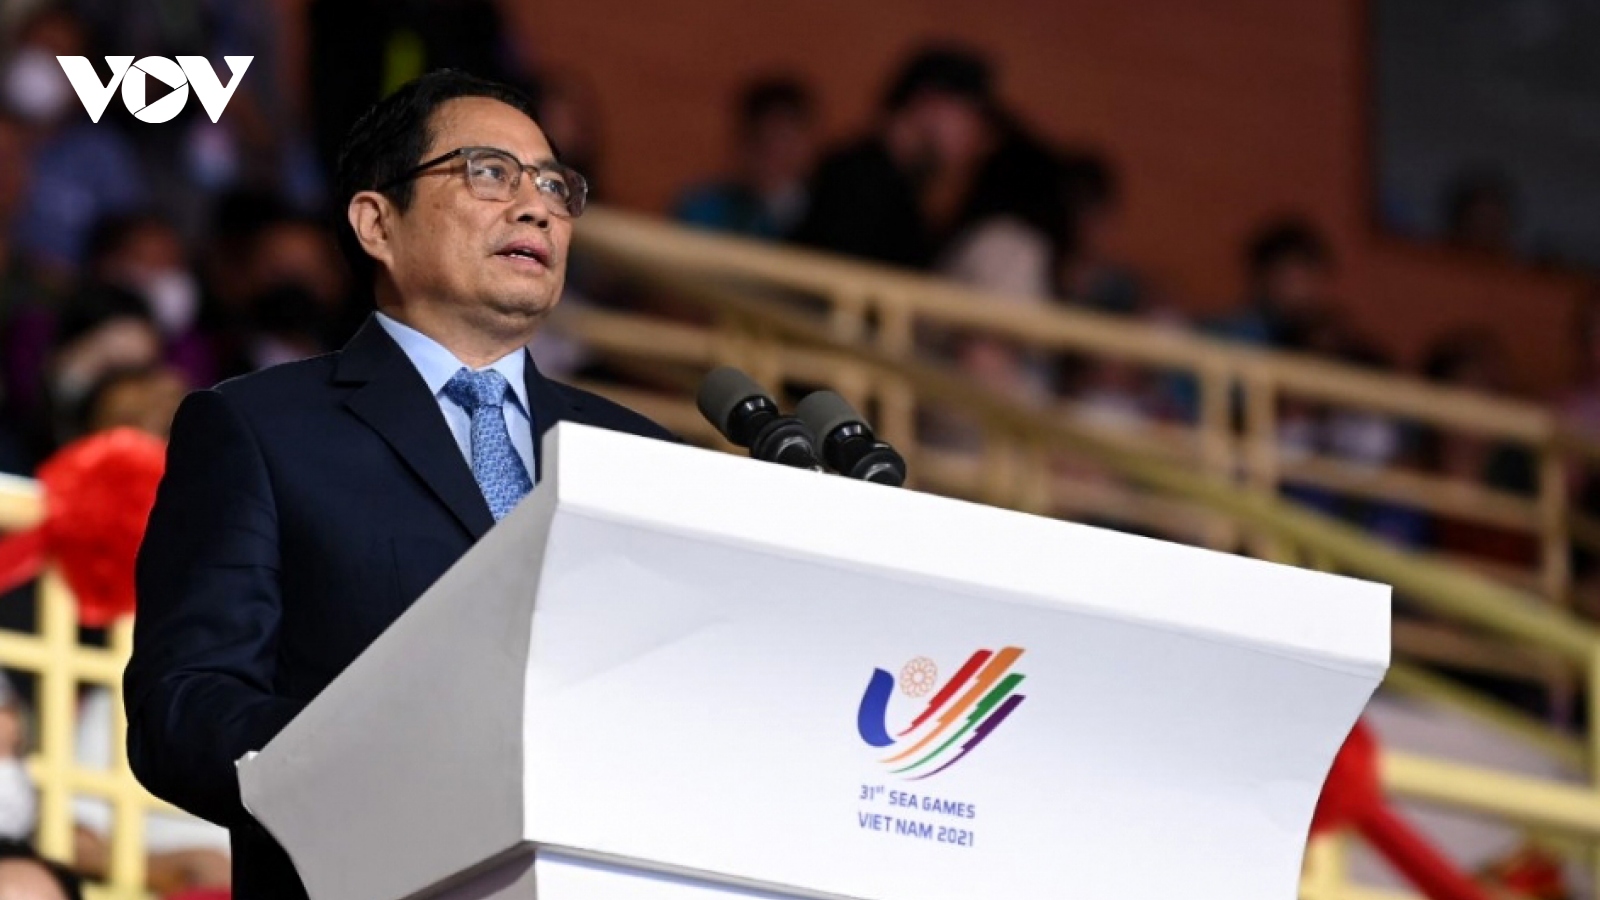 SEA Games 31 was a great success, PM says 